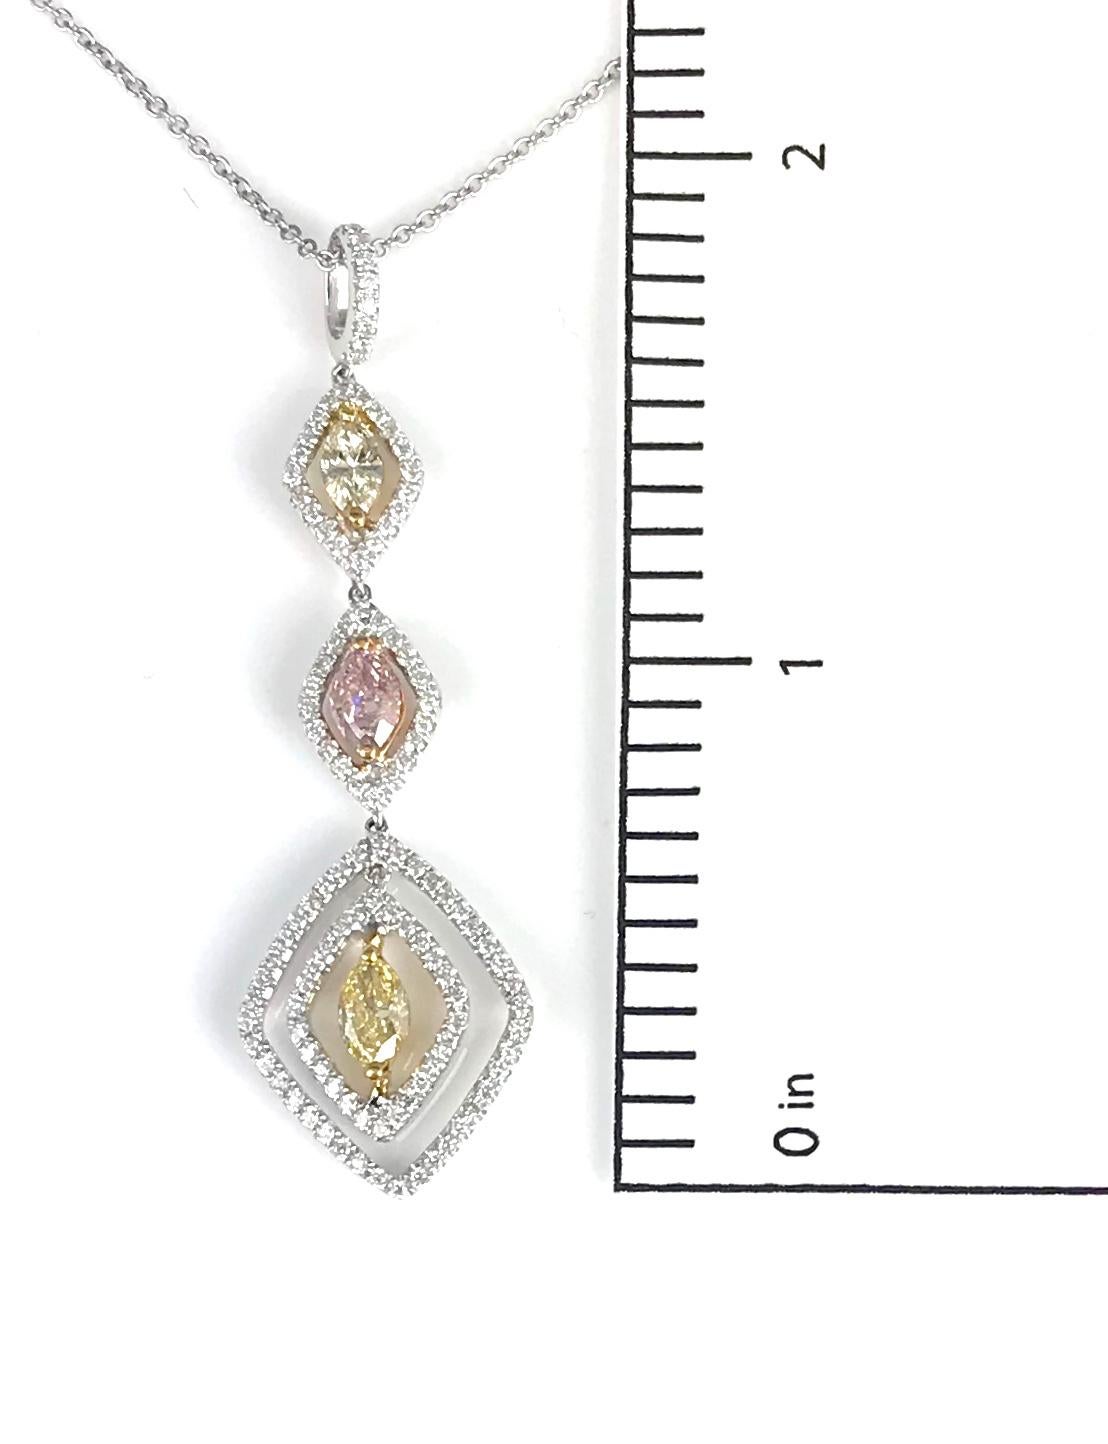 This three tier drop pendant features three marquise cut diamonds in pink, and yellow, each inside a frame of round white diamonds. Additional diamonds on the bail bring the total carat weight to 1.27 carats.

Pink Marquise cut diamond, 0.37